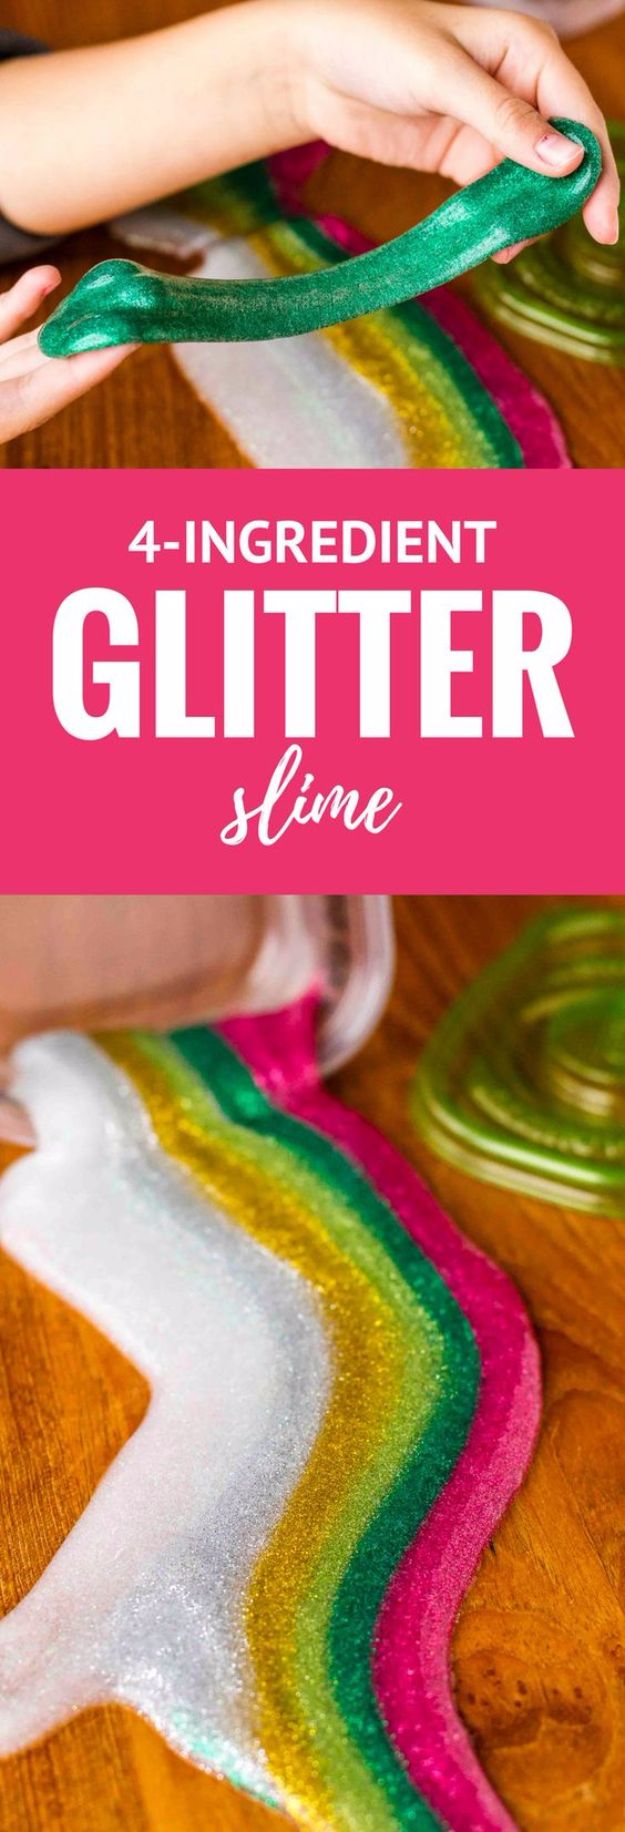 Borax Free Slime Recipes - 4-Ingredient Glitter Slime - Safe Slimes To Make Without Glue - How To Make Fluffy Slime With Shaving Cream - Easy 3 Ingredients Glitter Slime, Clear, Galaxy, Best DIY Slime Tutorials With Step by Step Instructions #slimerecipes #slime #kidscrafts #teencrafts